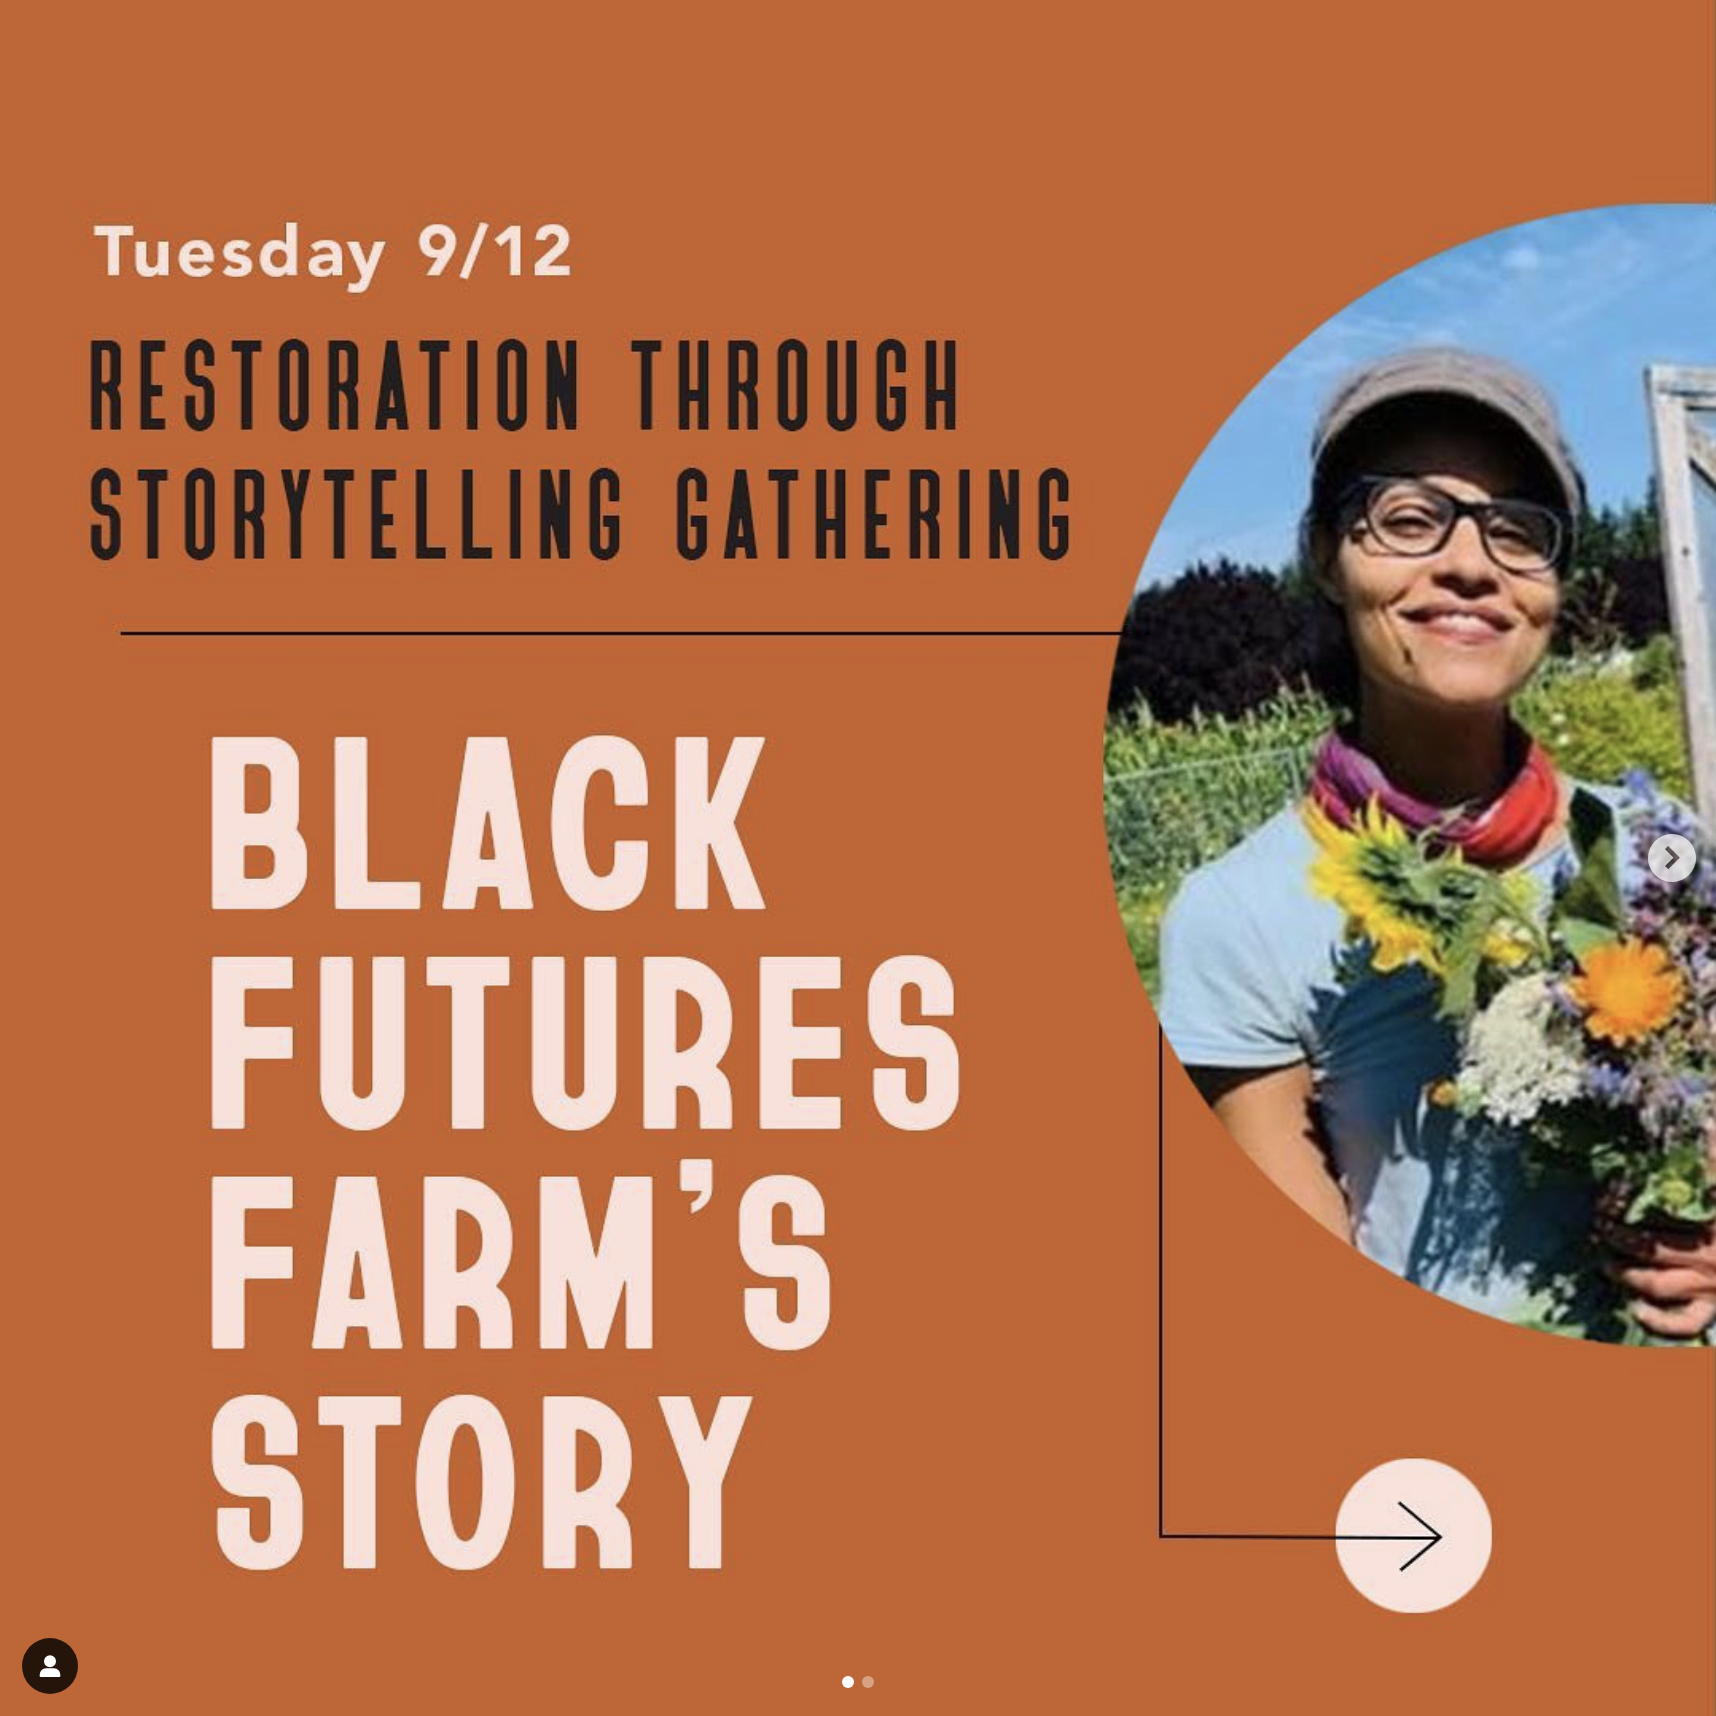 A promotional graphic with text: Tuesday, 9/12 Restoration through Storytelling Gathering: Black Futures Farm's Story